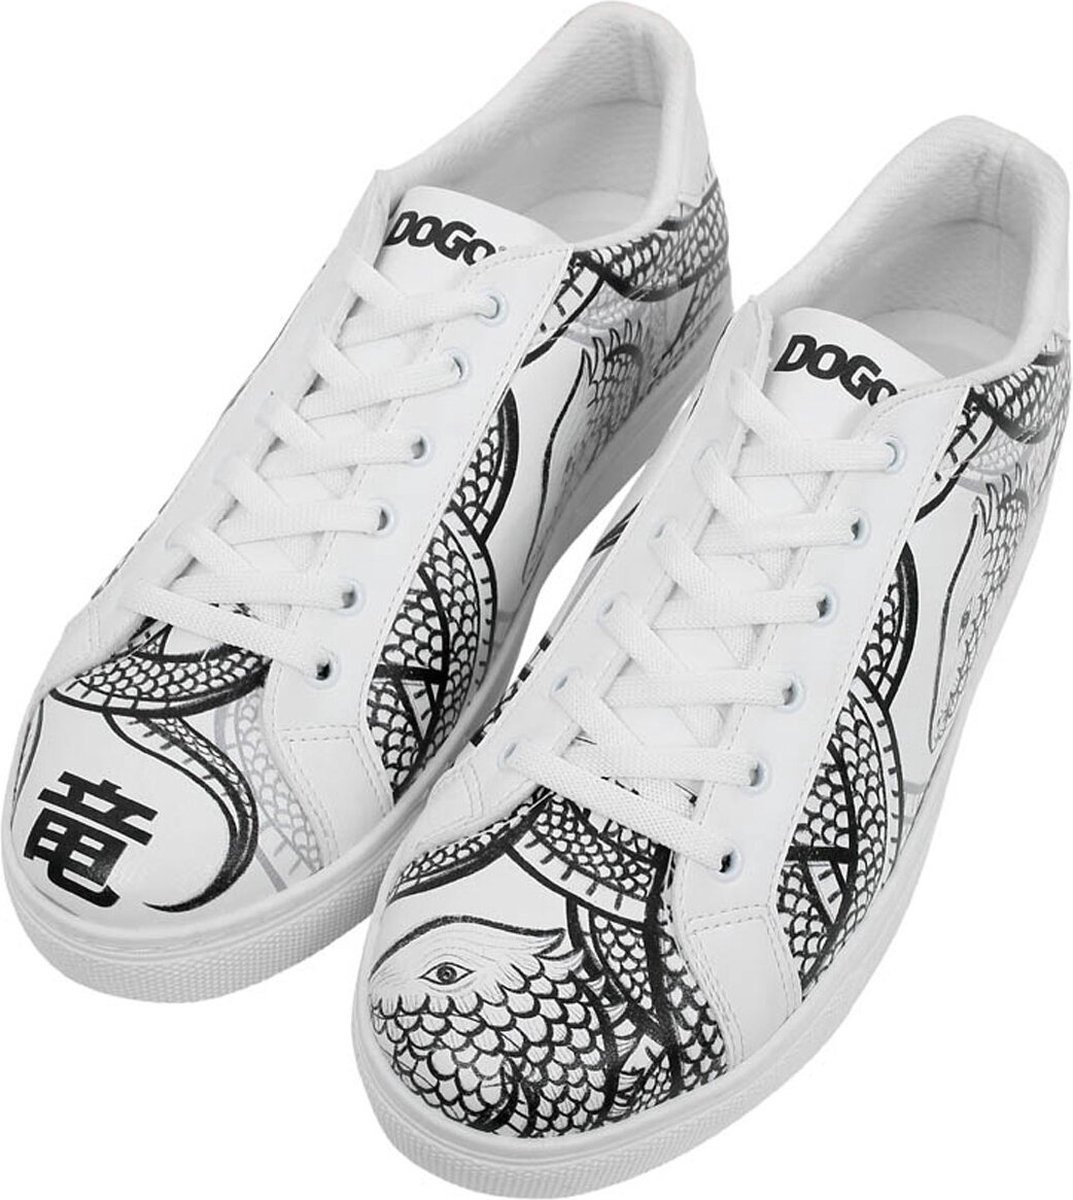 DOGO DOGO Ace Dames Sneakers - The Power of the Dragon Dames Sneakers 44